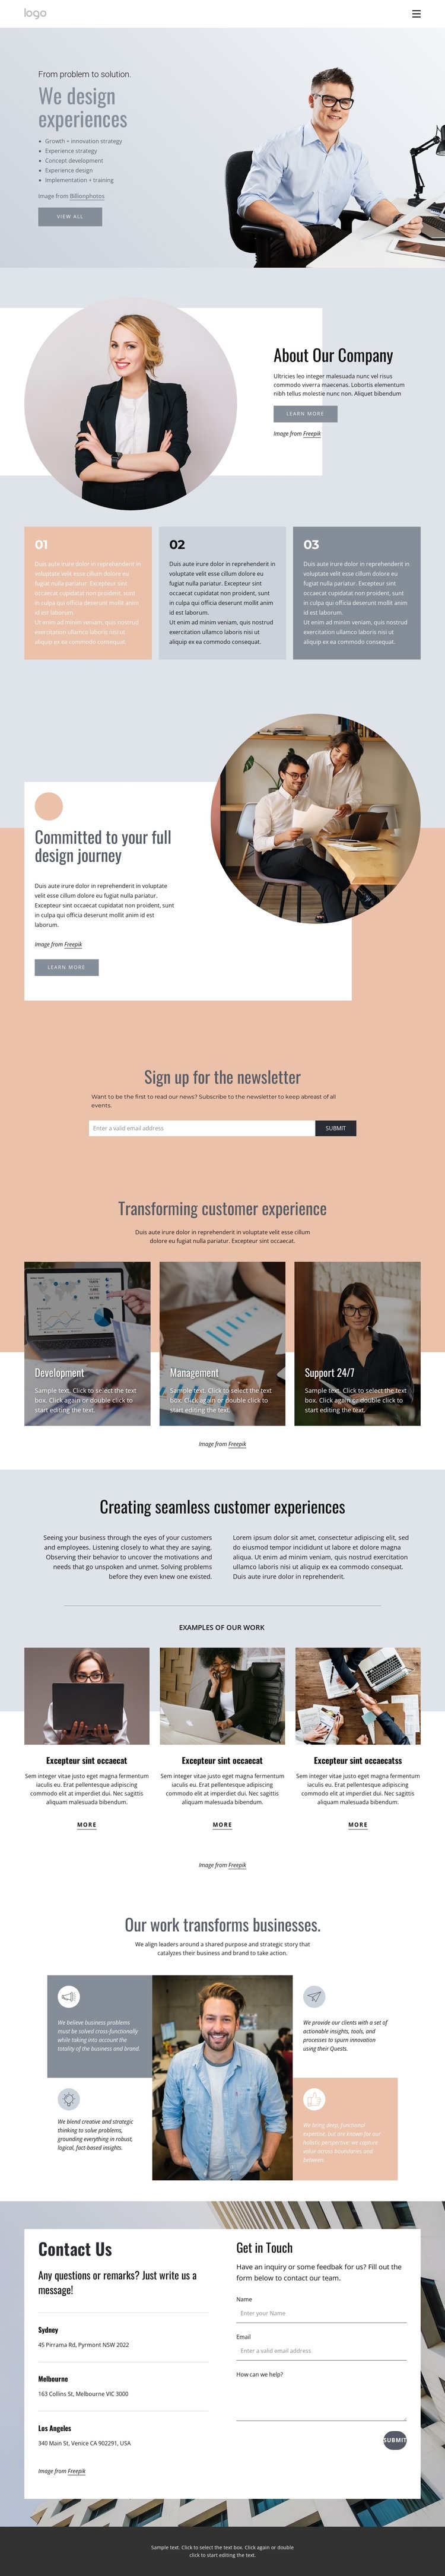 Unique design experiences, services, and products One Page Template